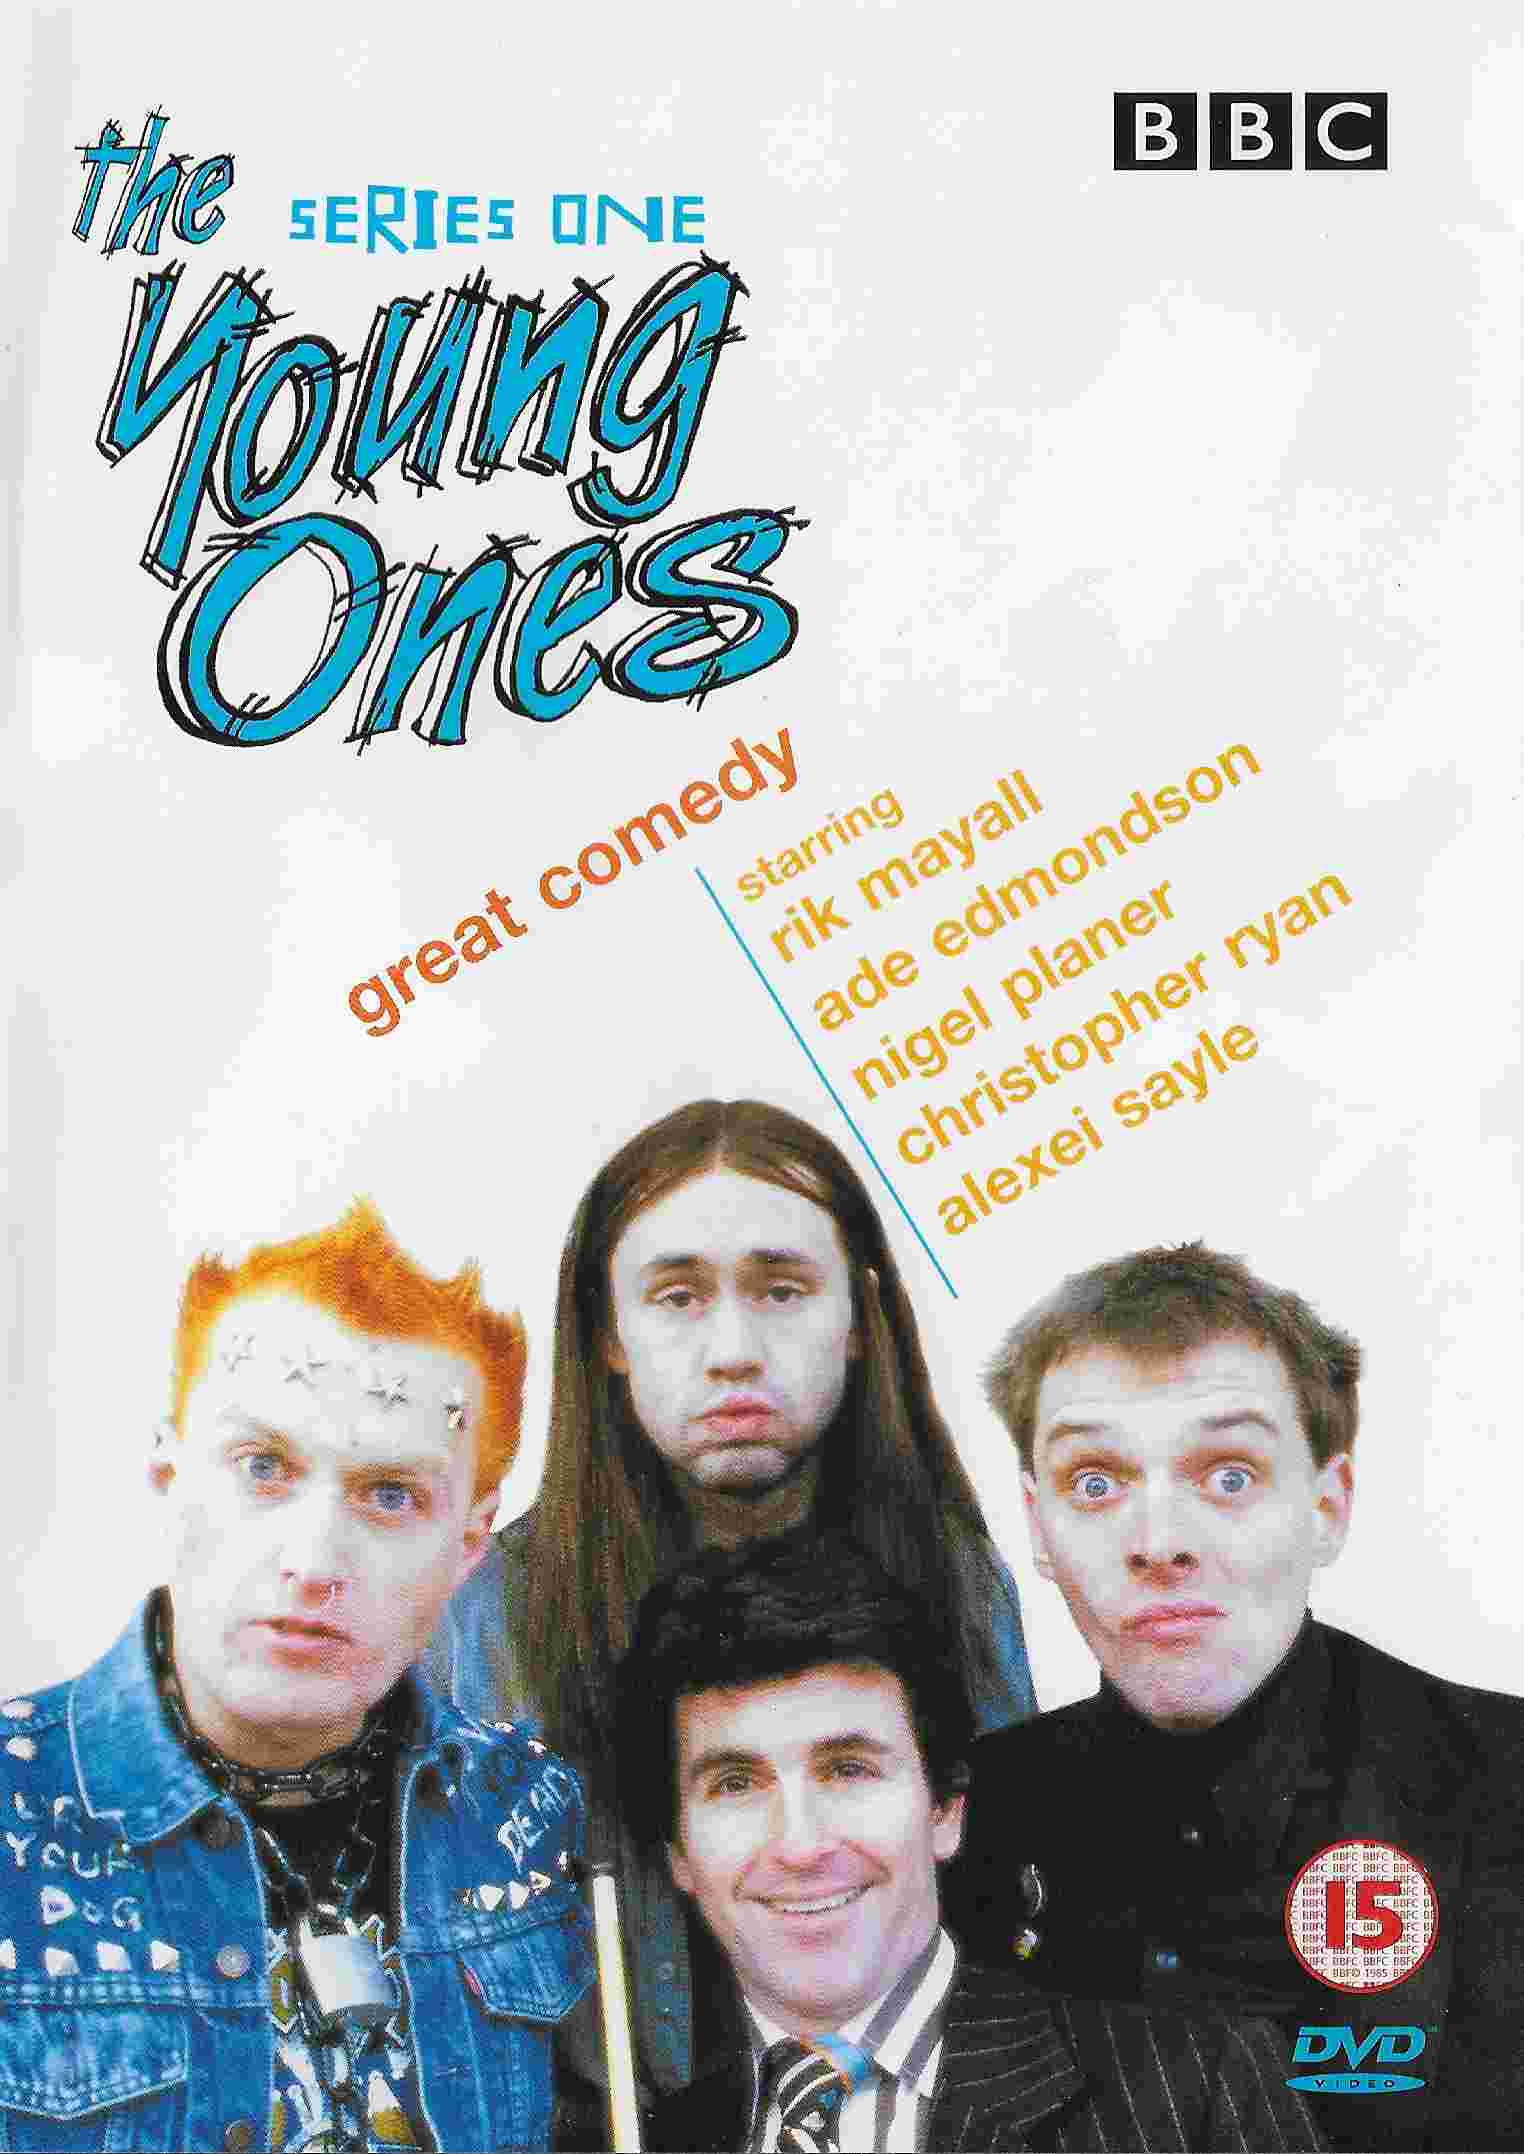 Picture of BBCDVD 1136 The young ones - Series 1 by artist Ben Elton / Rik Mayall / Lise Mayer / Alexei Sayle from the BBC dvds - Records and Tapes library